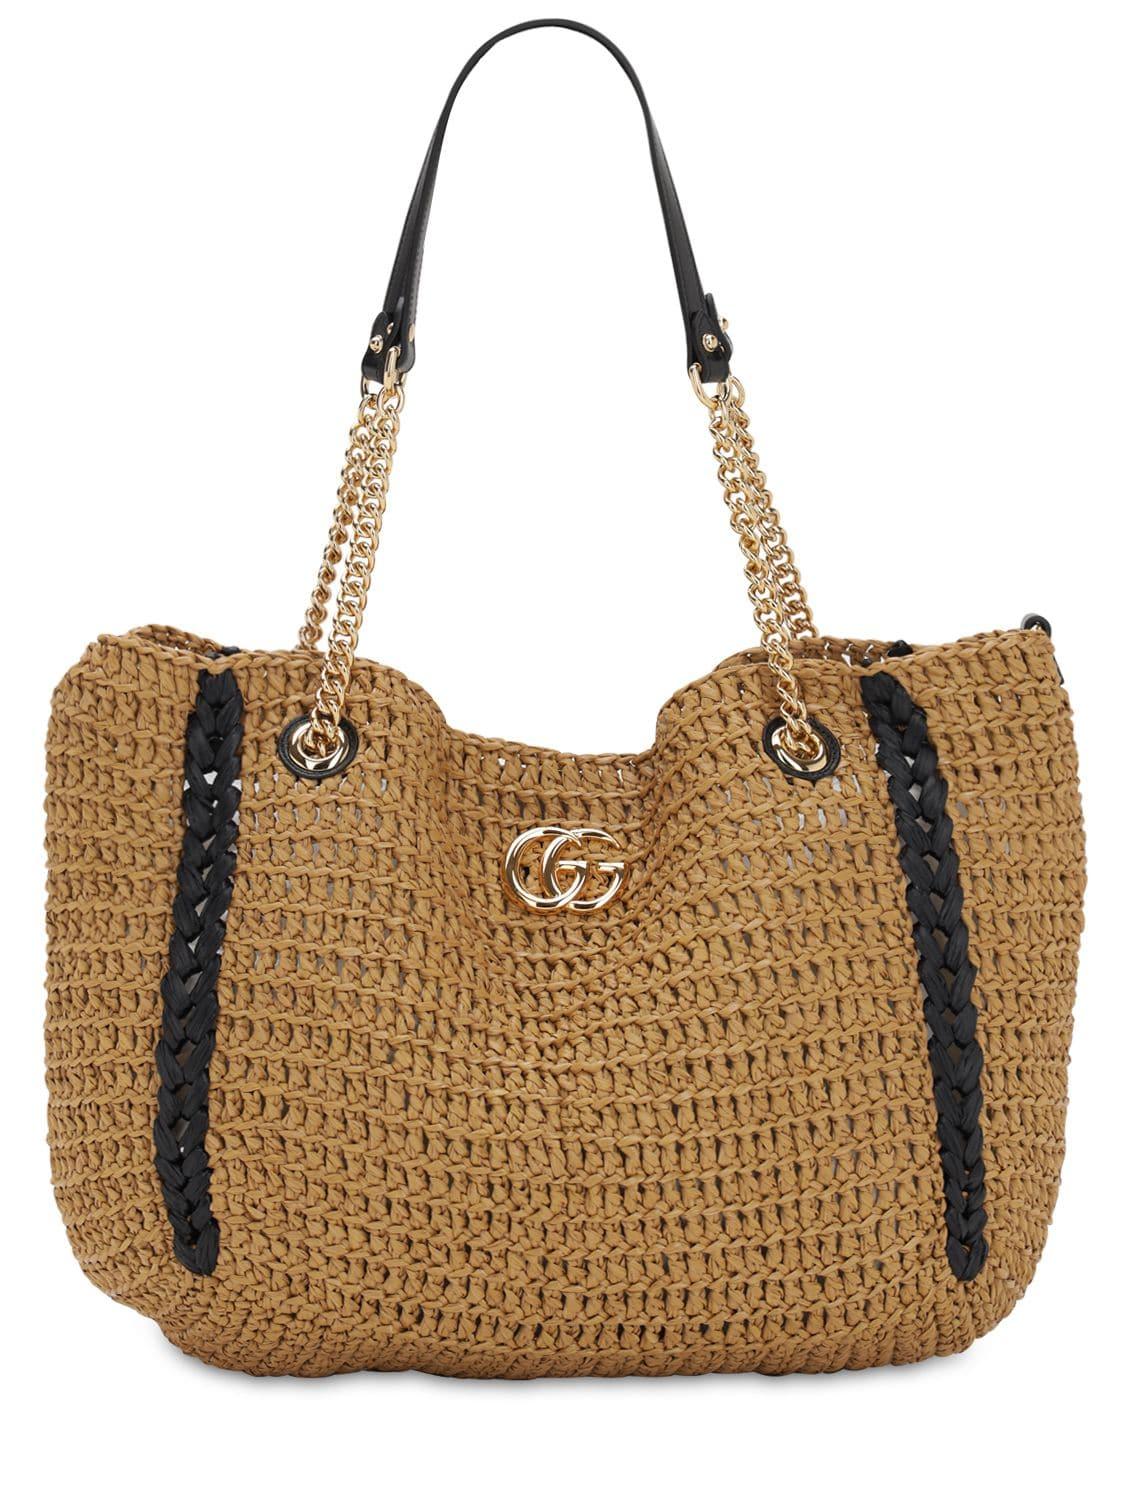 Gucci Large Gg Marmont Crochet Bag - Lyst